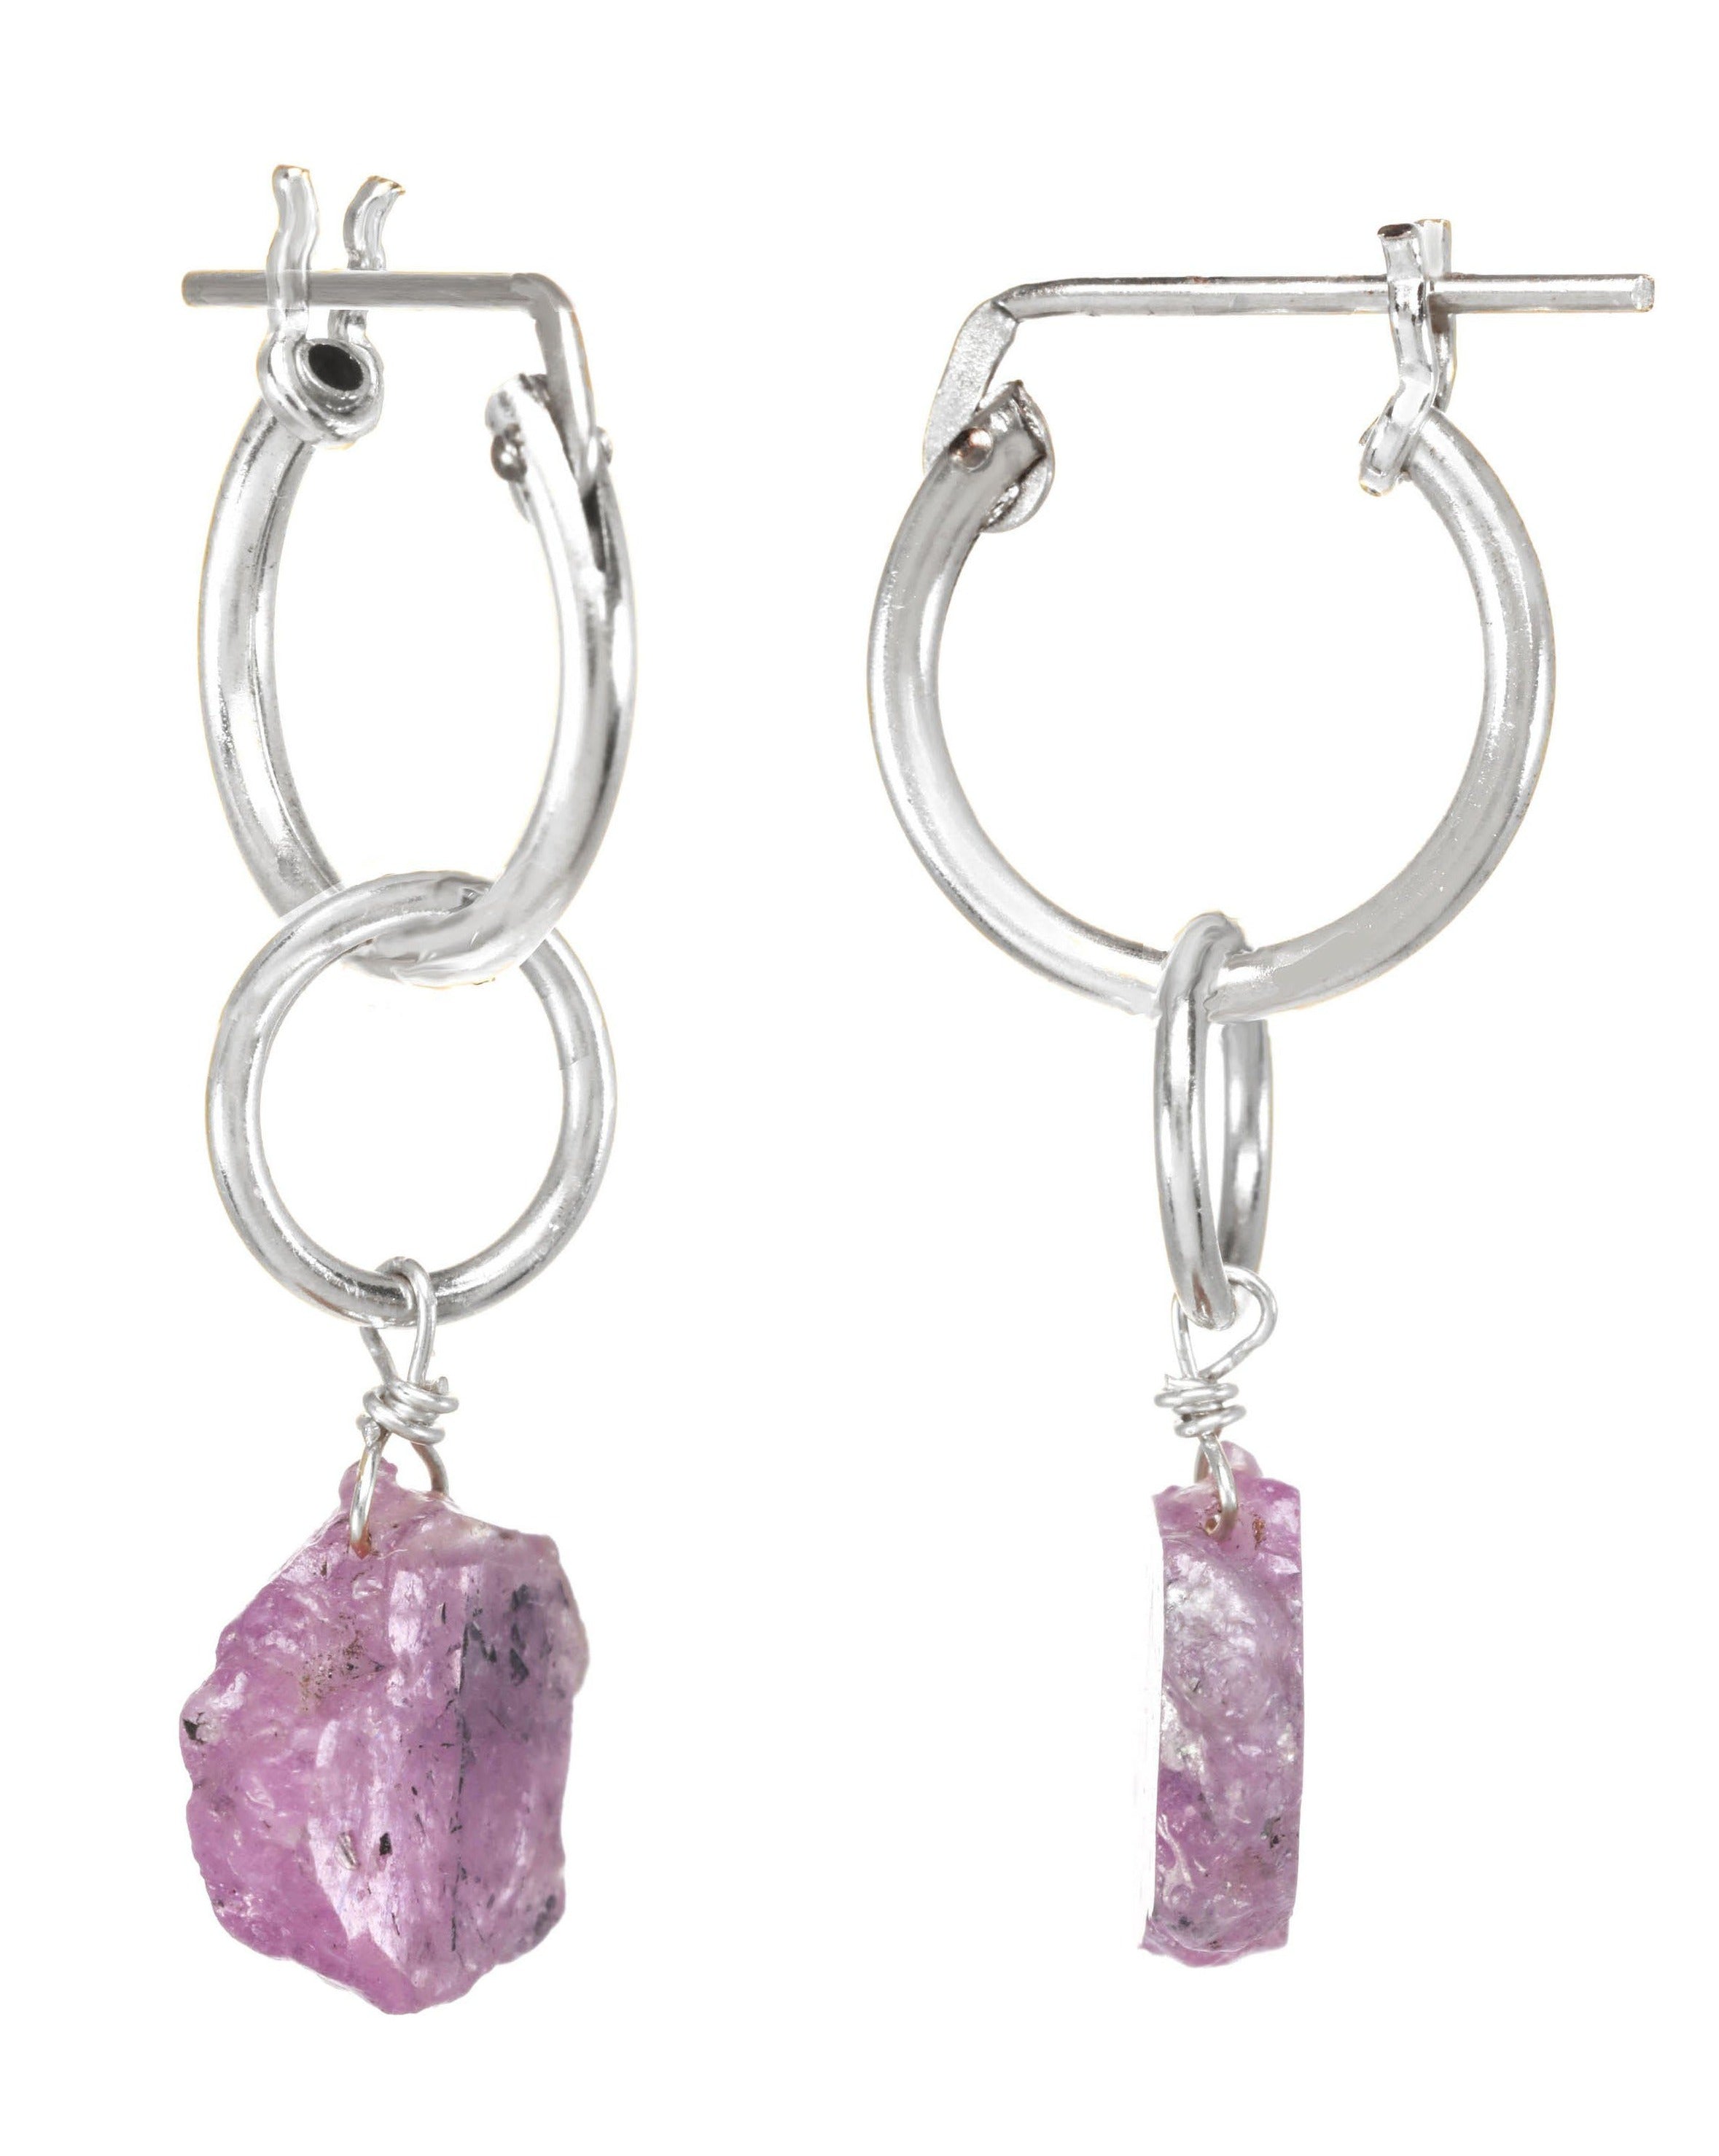 Sugar Earrings by KOZAKH. 12mm snap closure hoop earrings, with 1 inch drop length, crafted in Sterling Silver, featuring a Pink Tourmaline slice.